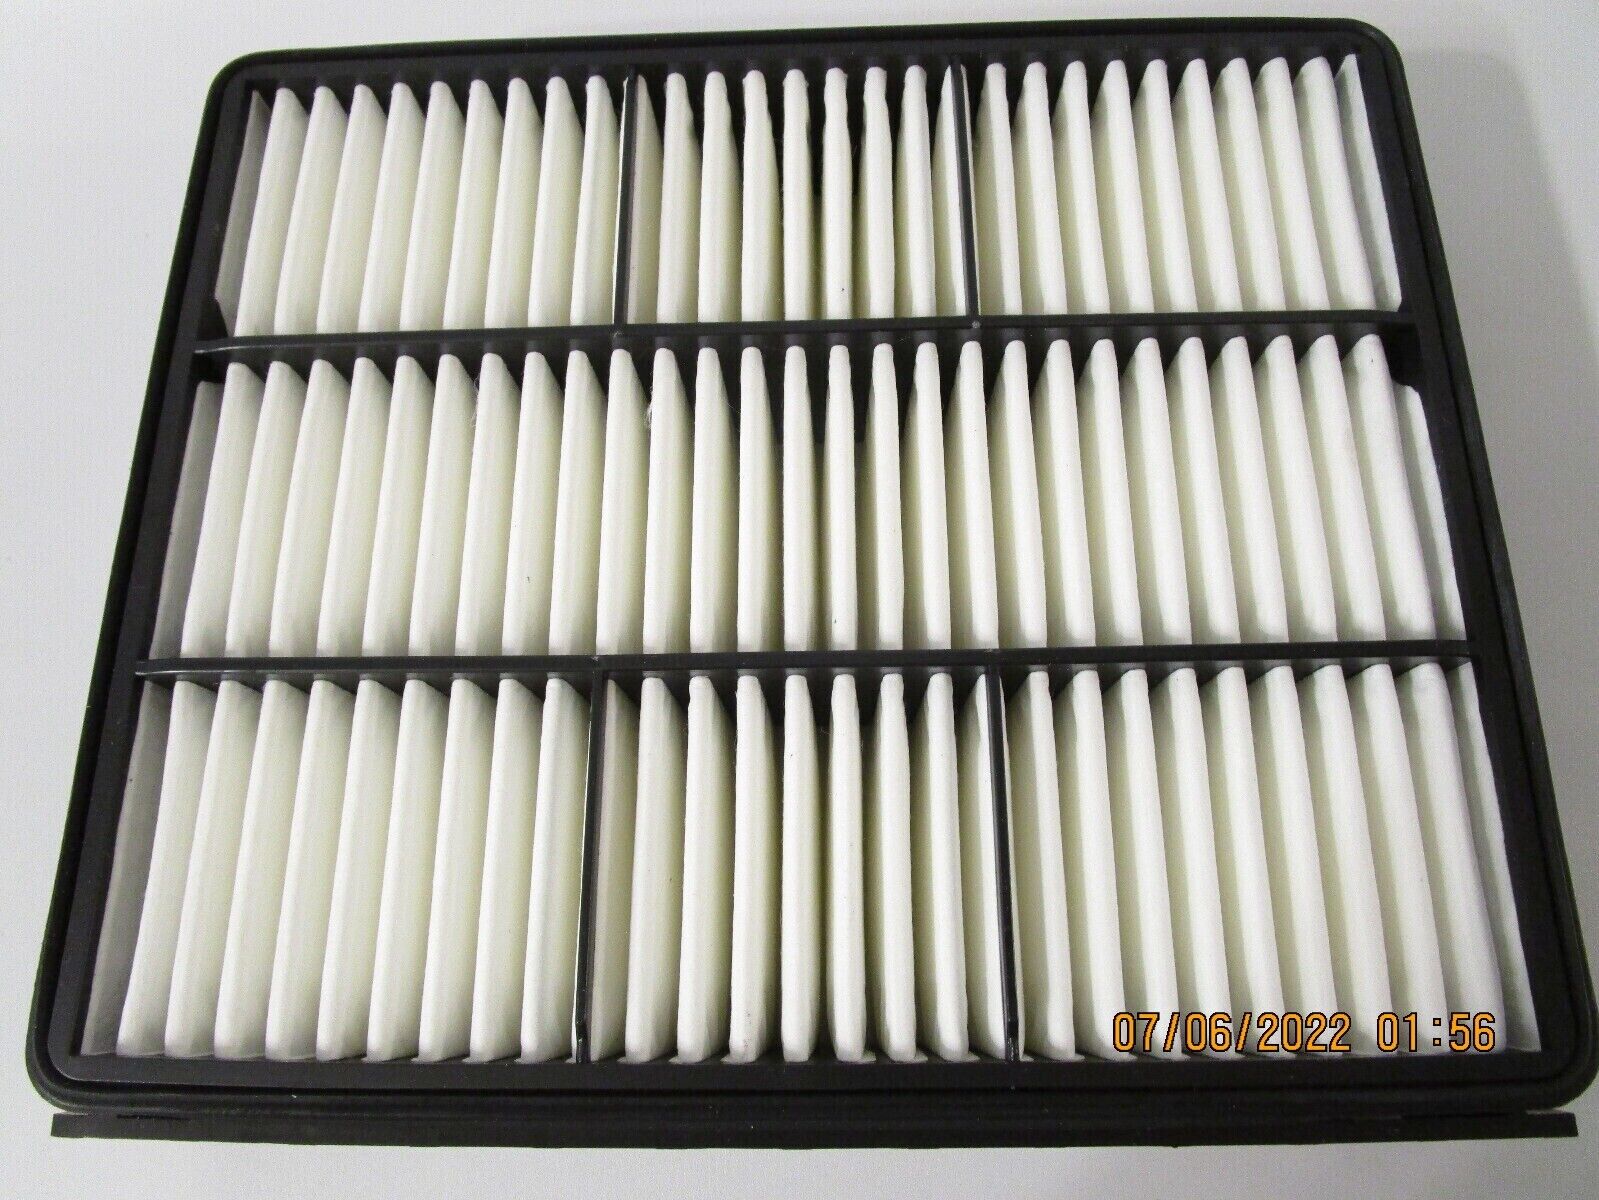 Aftermarket MR571474 Air Filter fits 97-04 Diamante